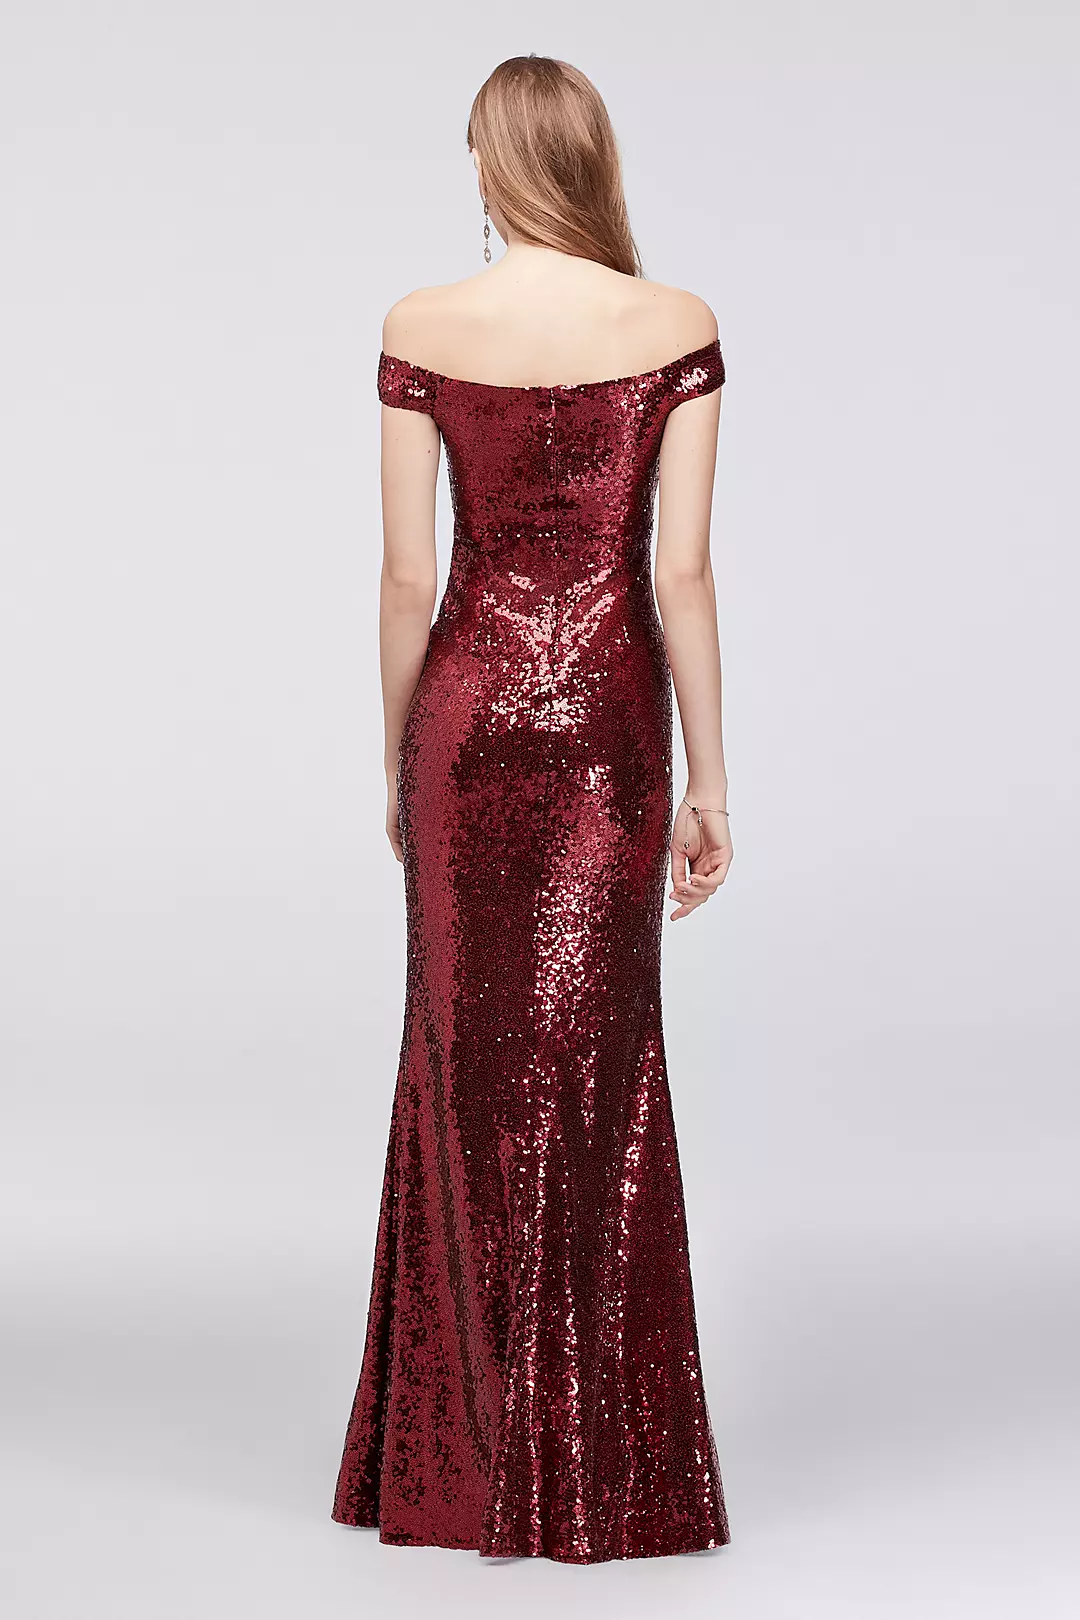 Allover Sequin Off-the-Shoulder Sheath Gown Image 2